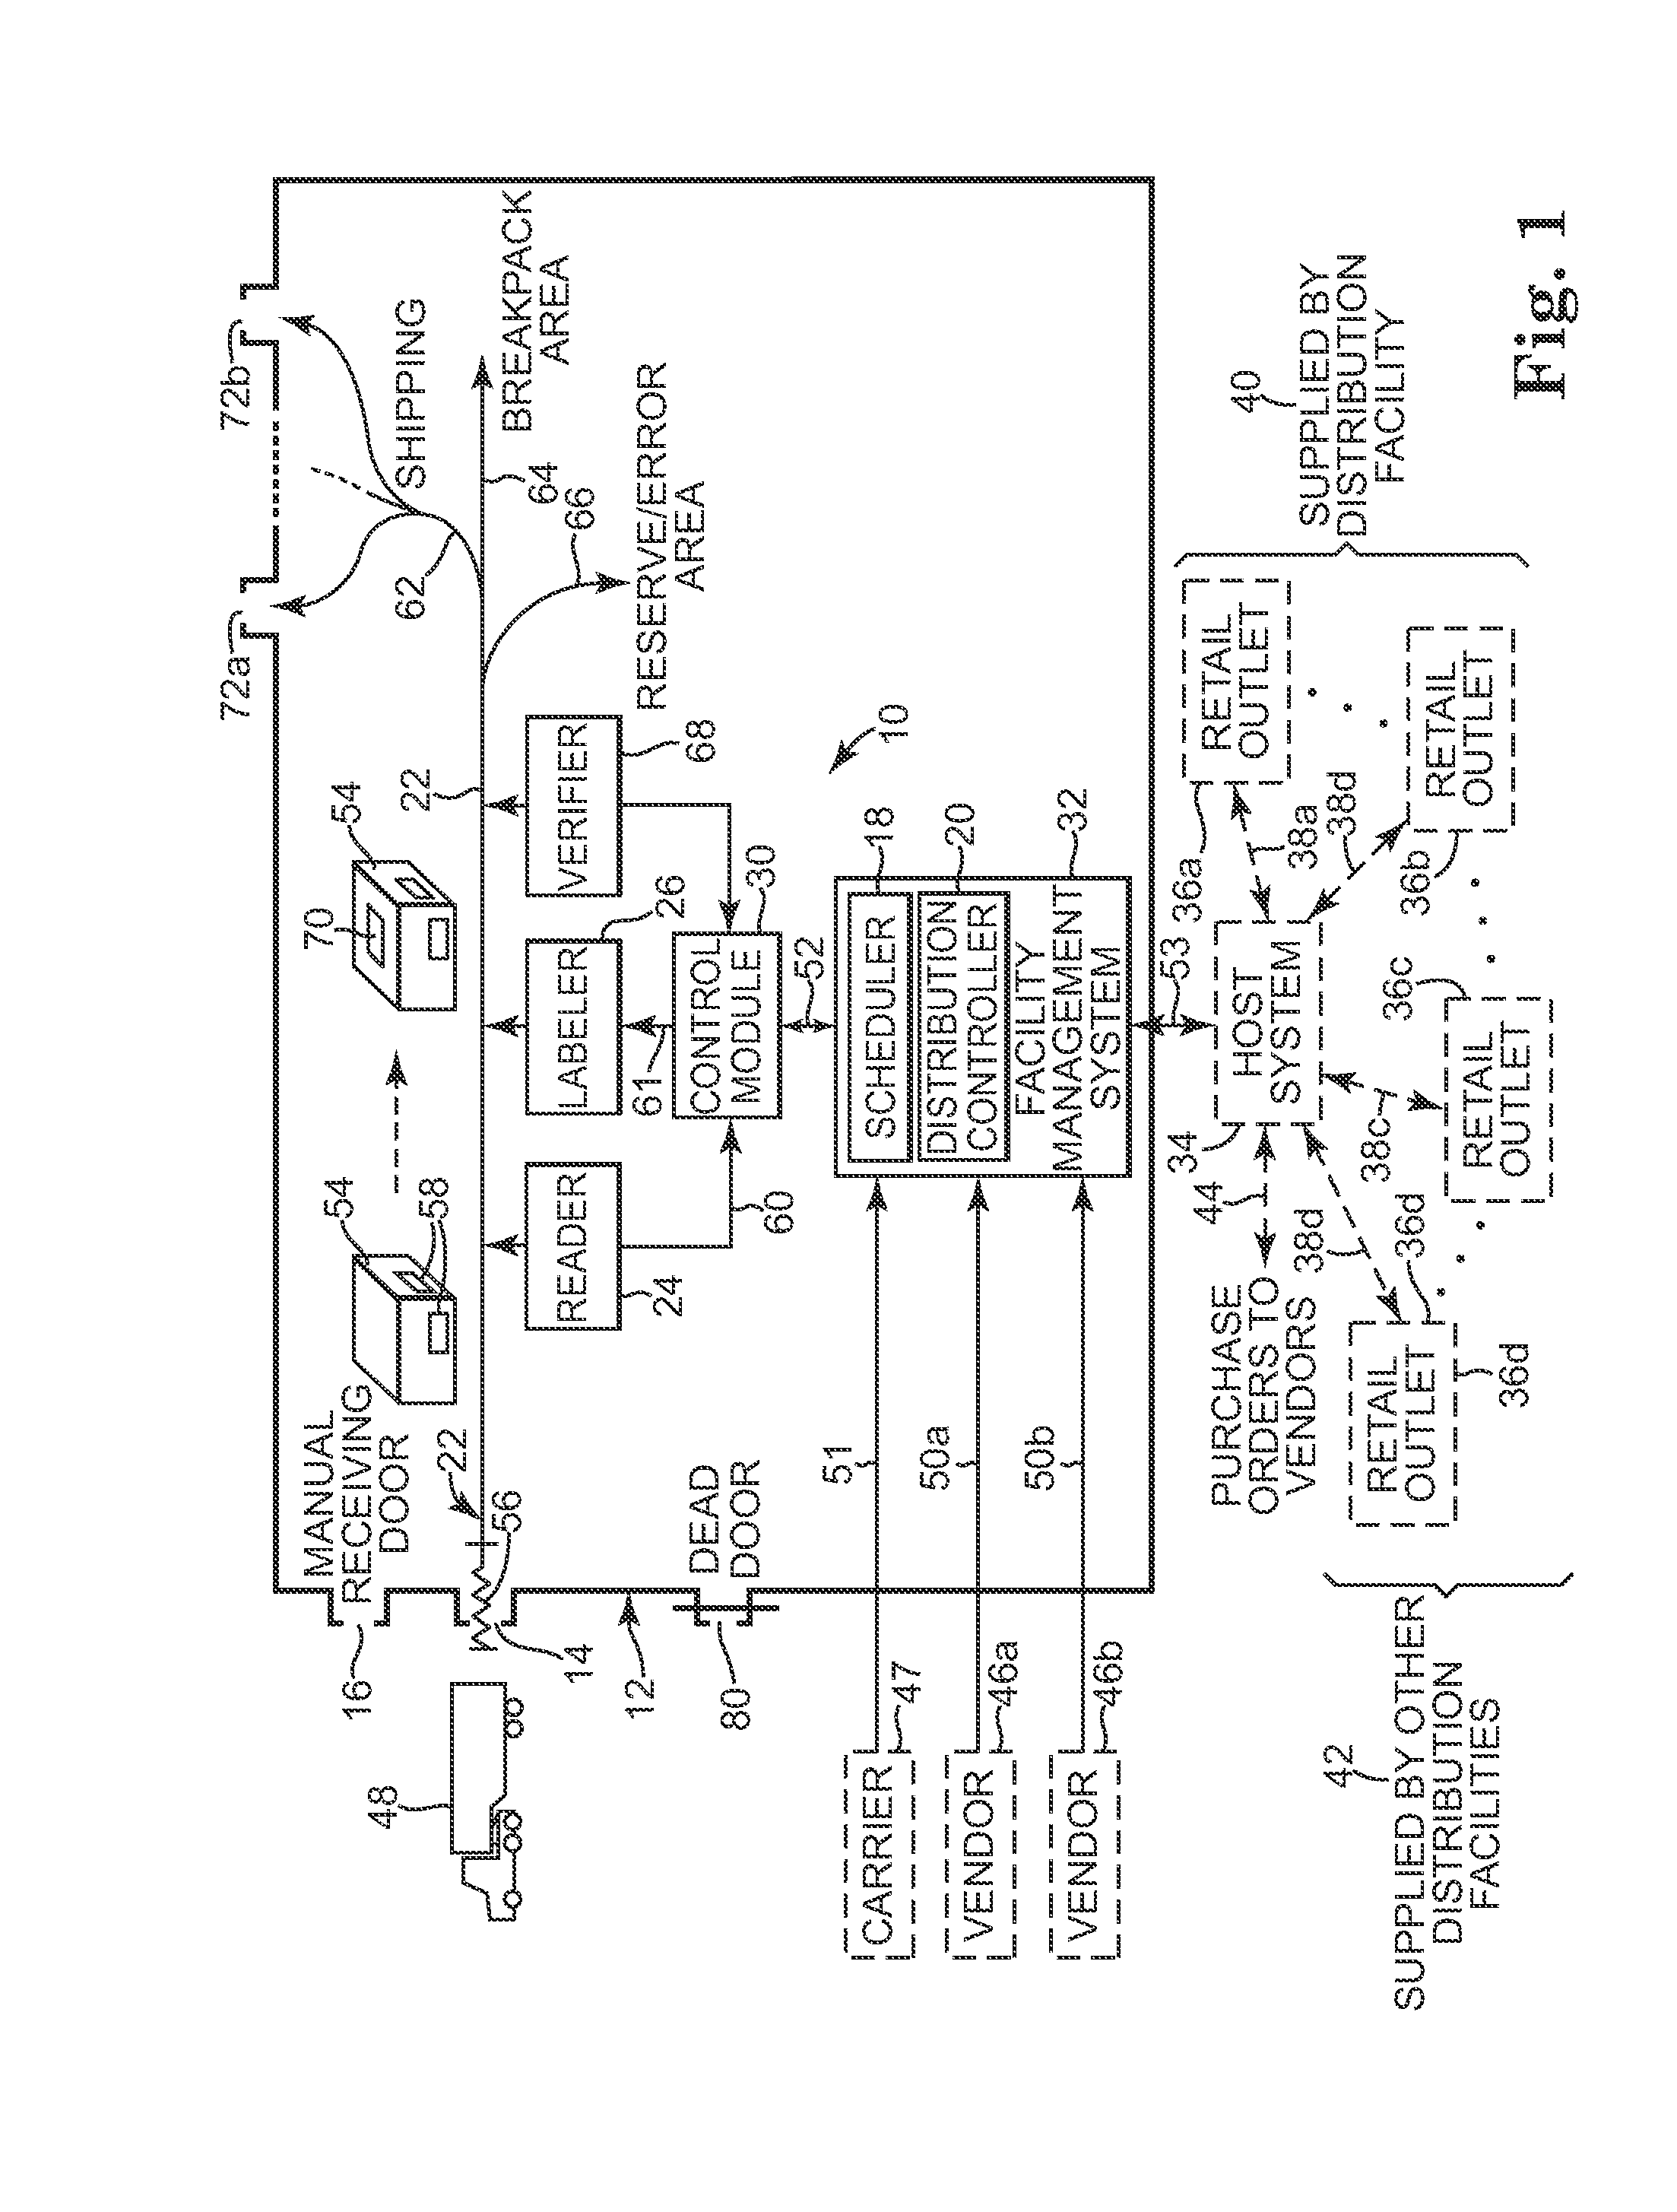 Automated receiving system